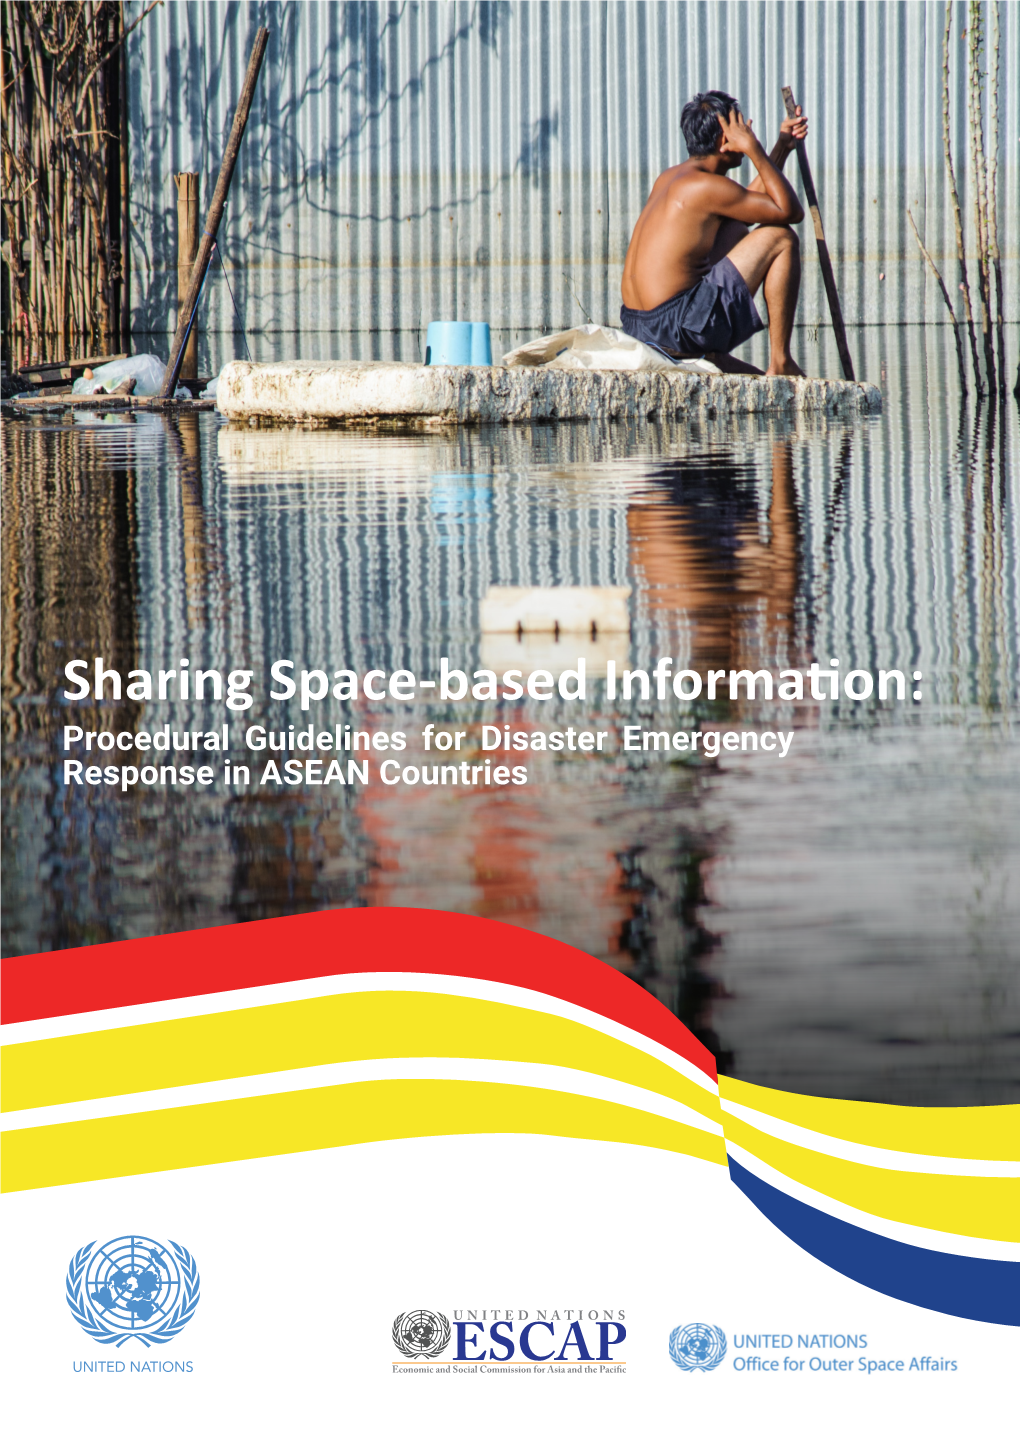 Sharing Space-Based Information: Procedural Guidelines for Disaster Emergency Response in ASEAN Countries